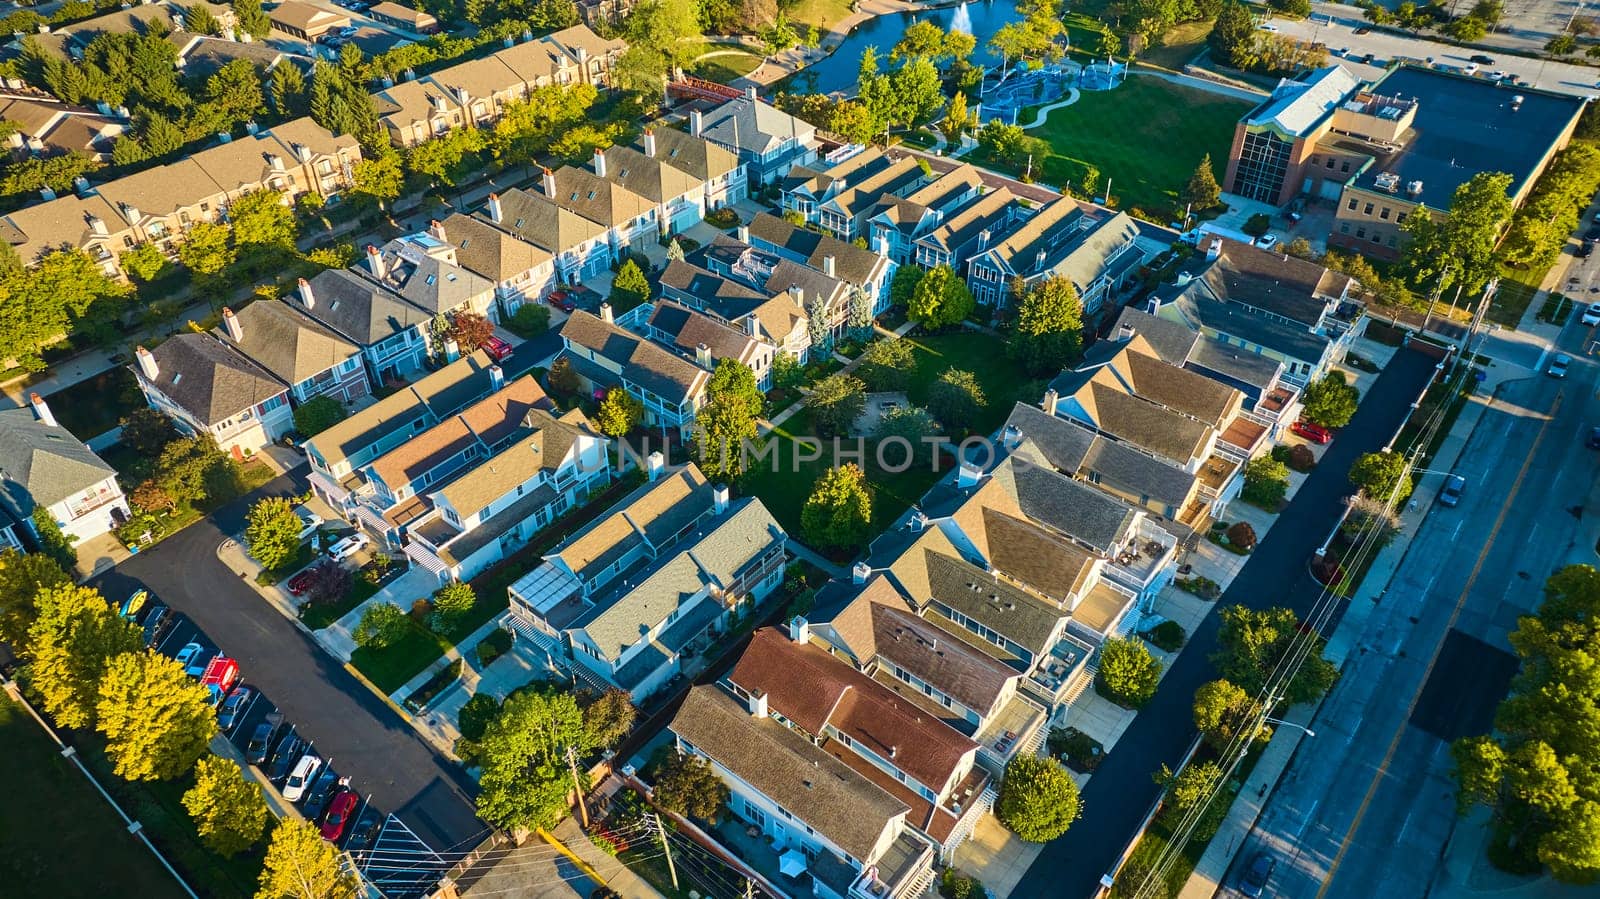 Aerial Suburban Tranquility at Sunset - Indiana Neighborhood by njproductions